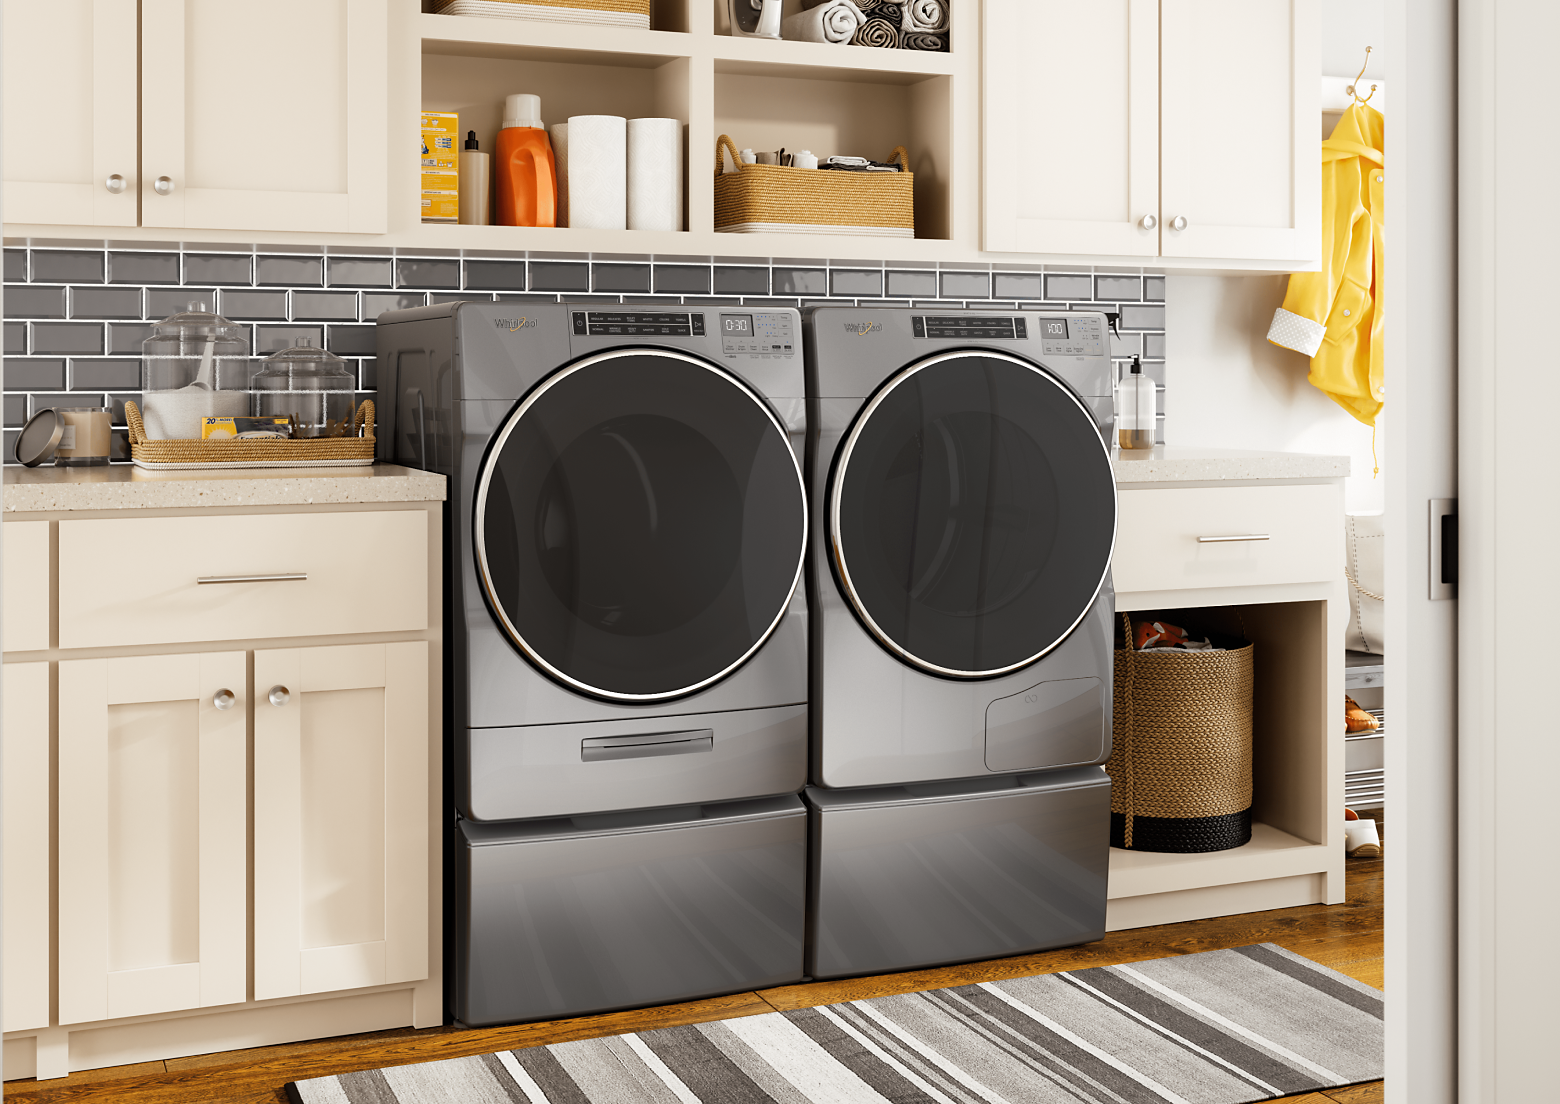 Whirlpool® Washer and Dryer in a laundry room